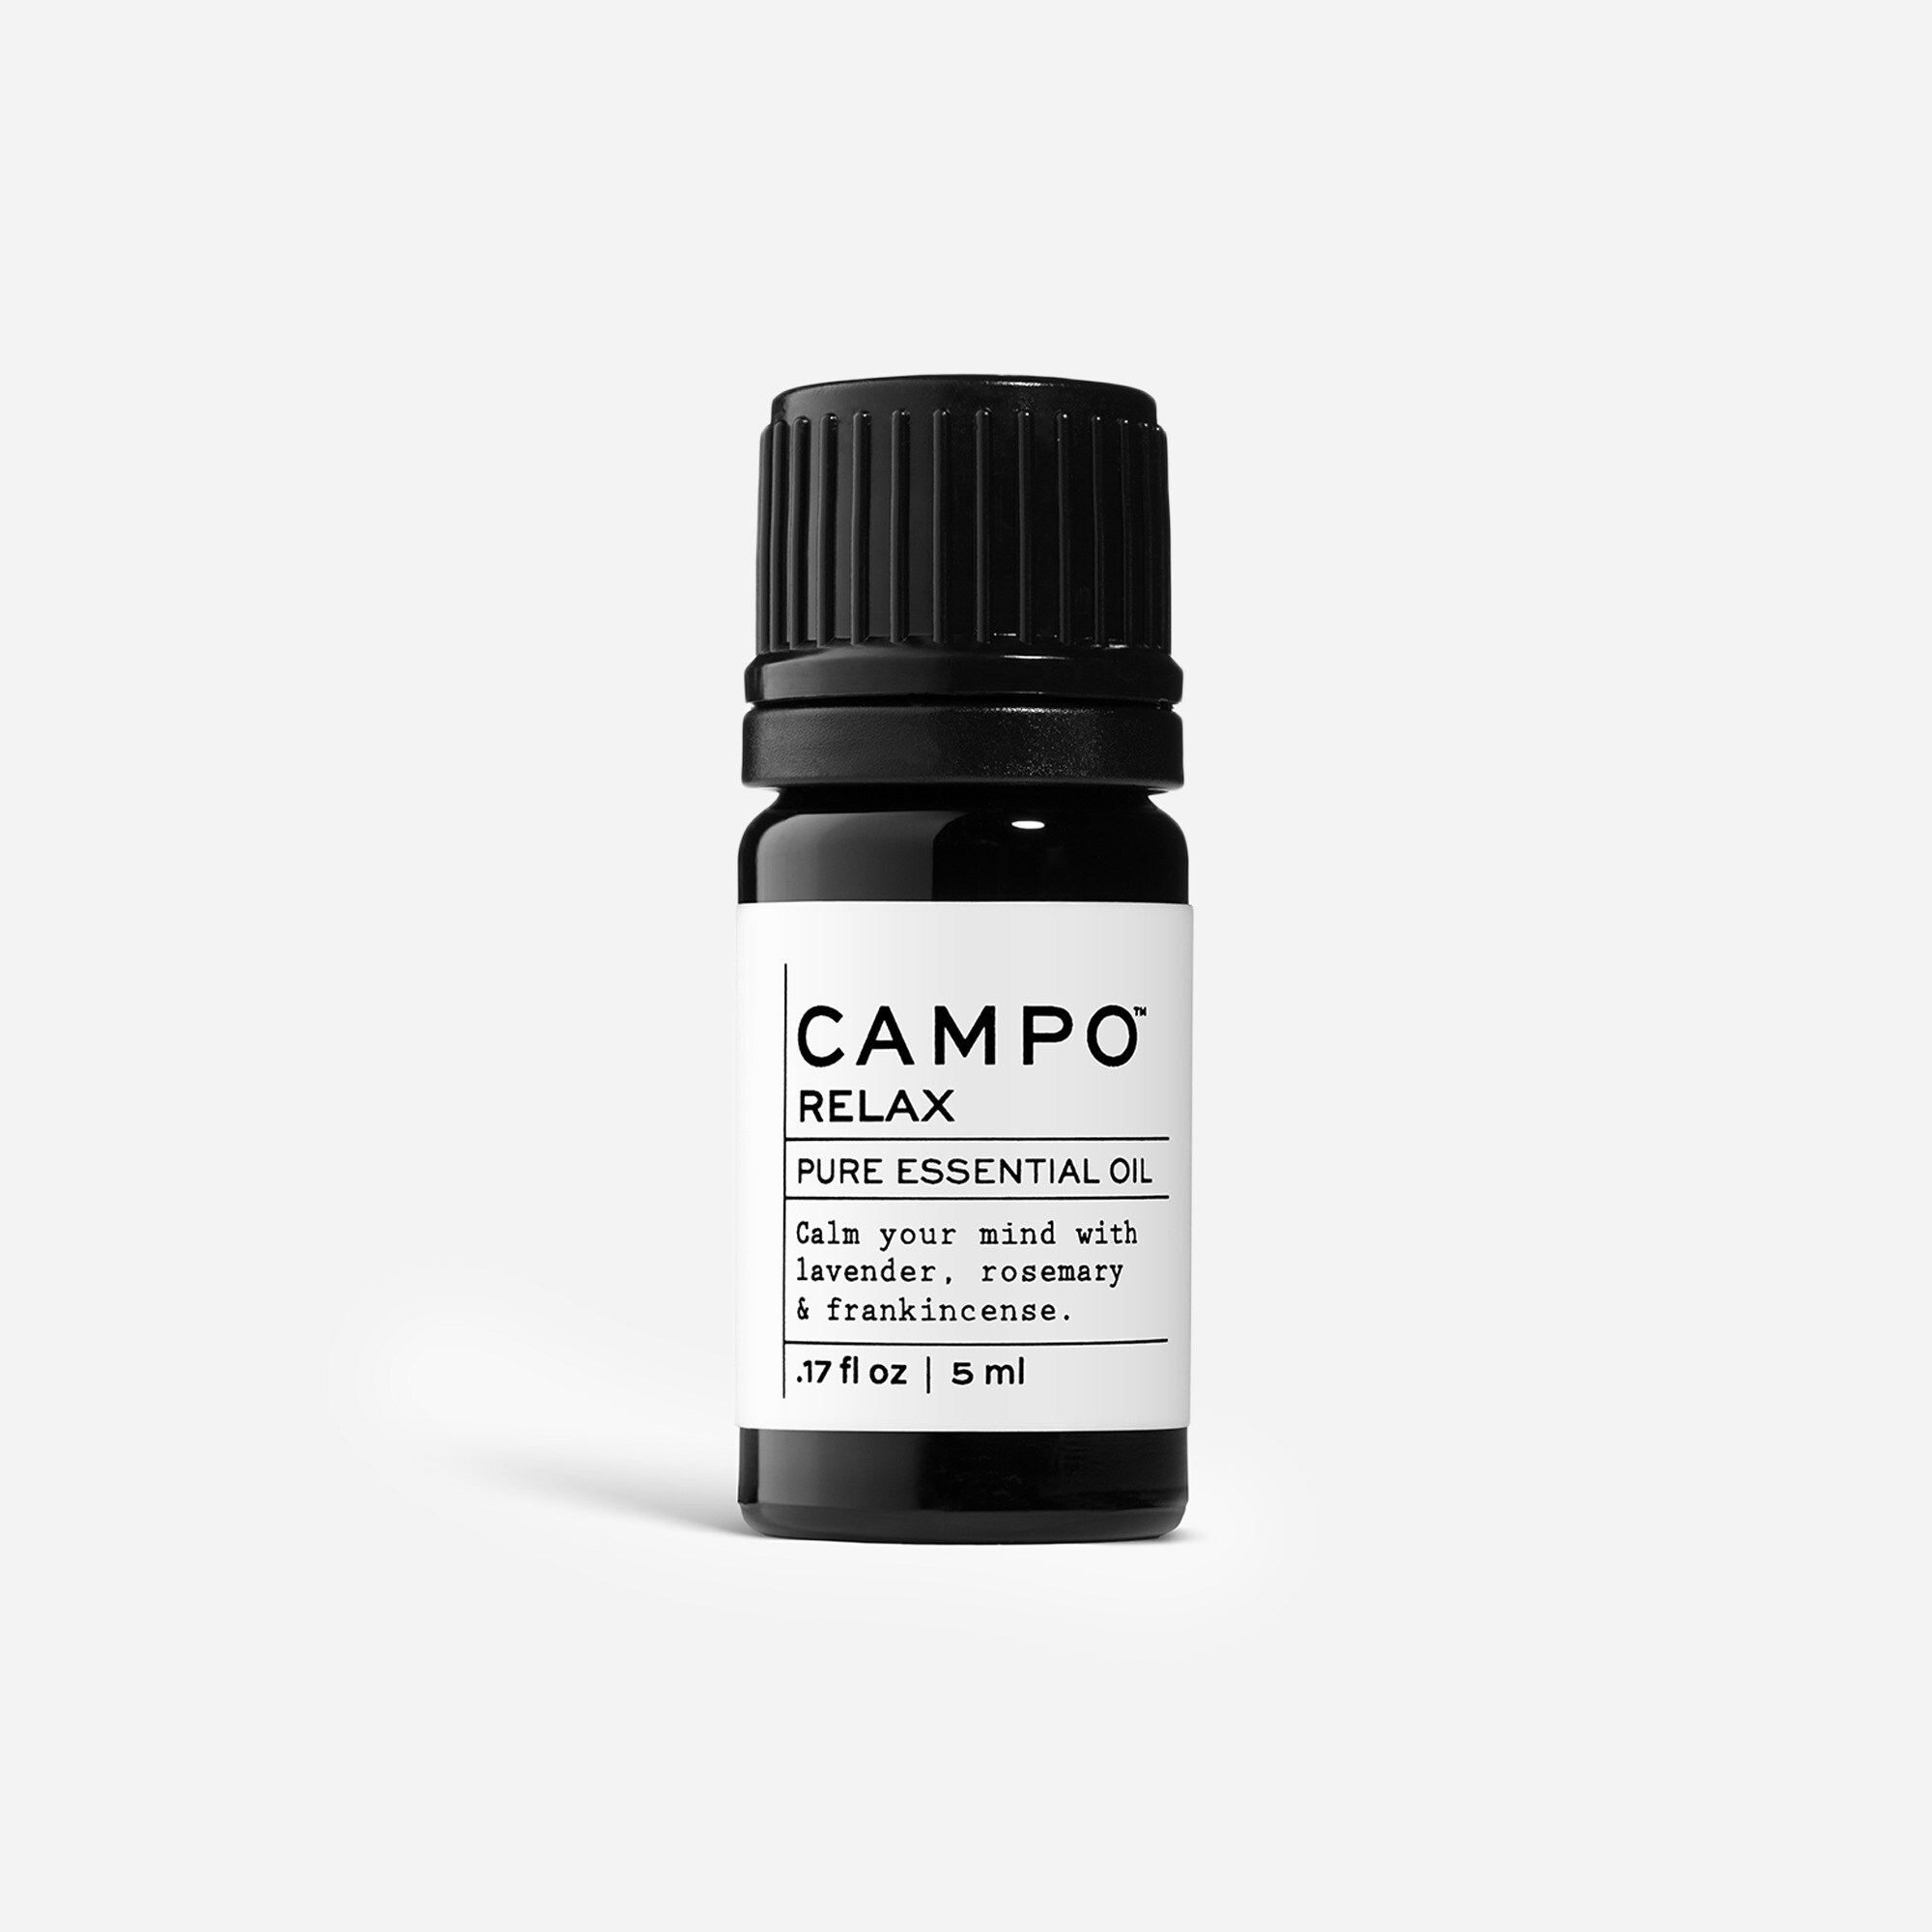  CAMPO® RELAX pure essential oil blend